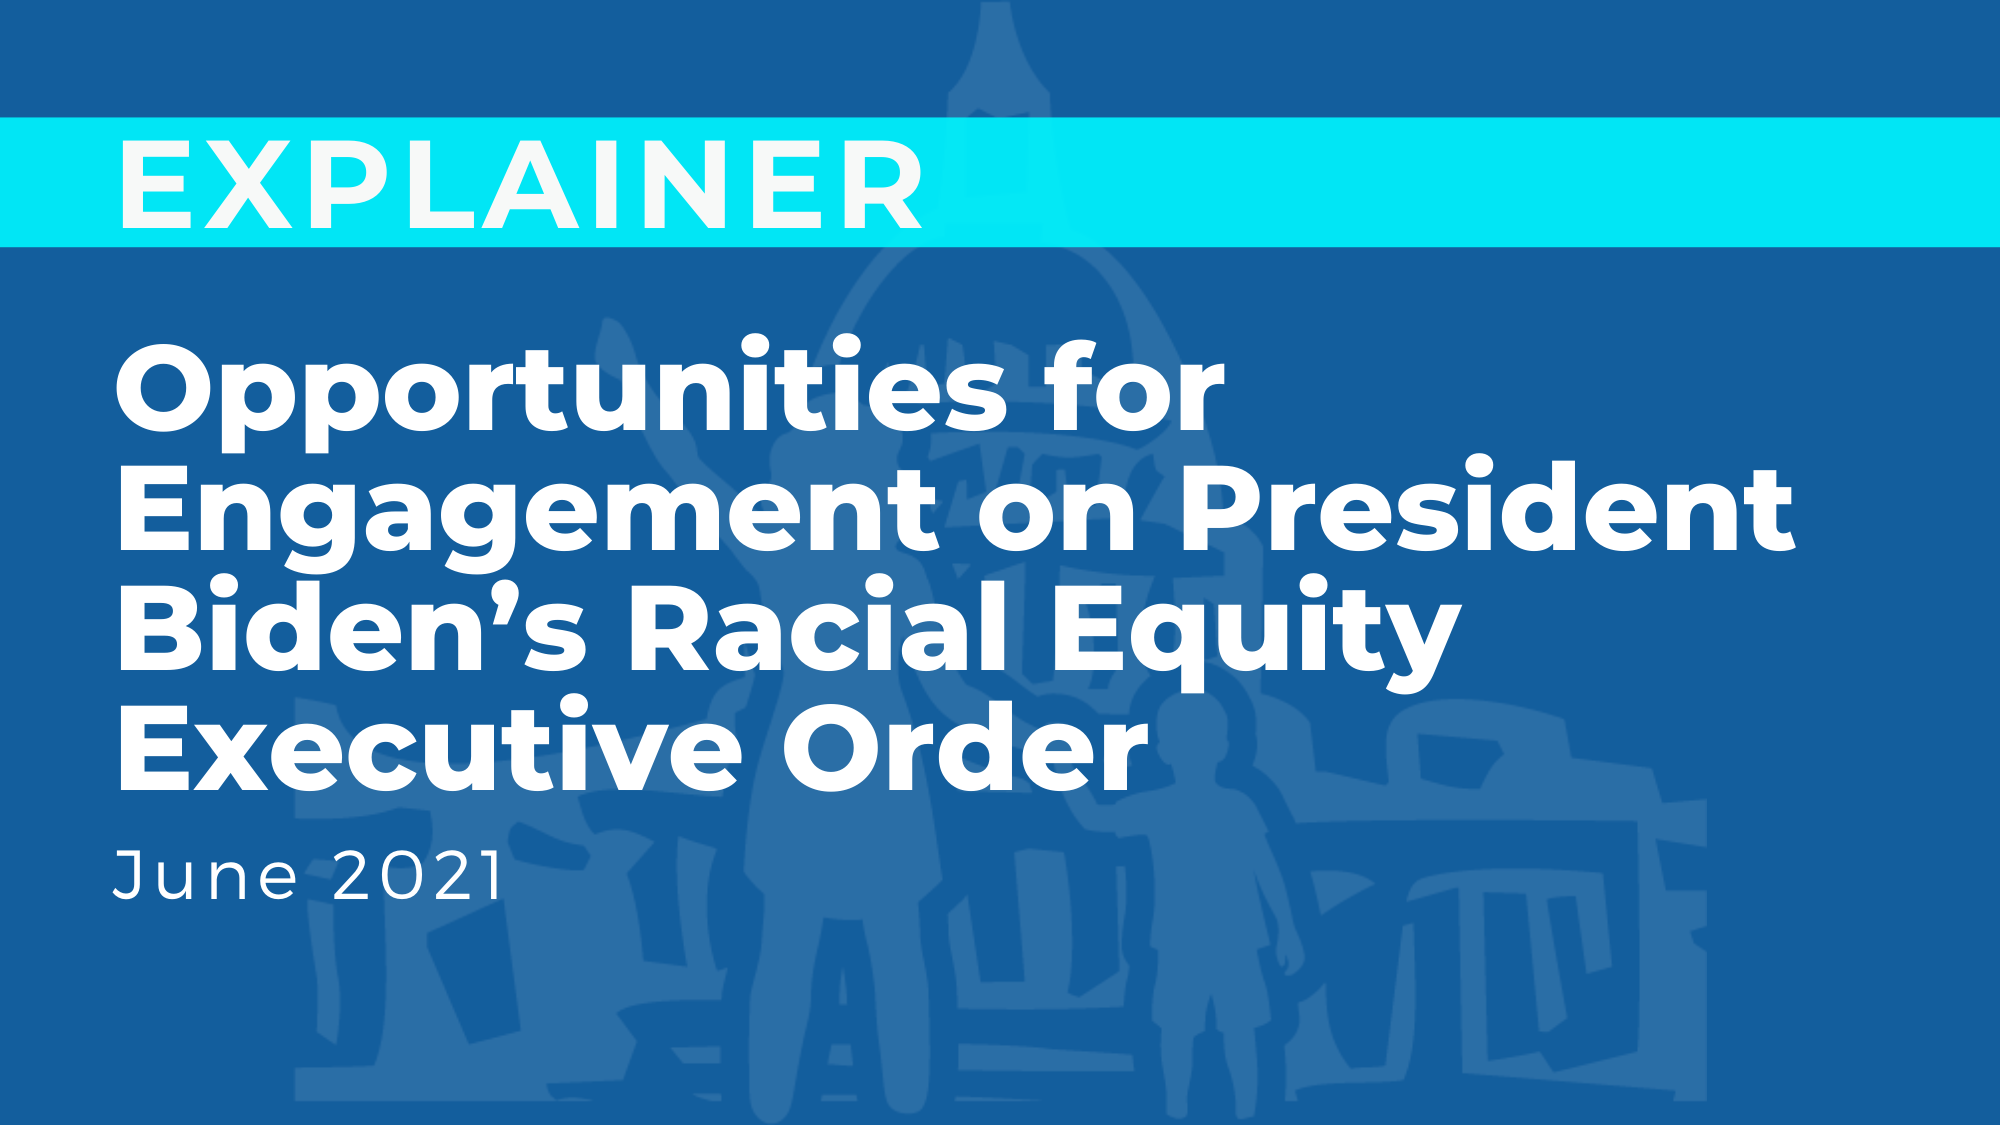 Opportunities for Engagement on President Biden's Racial Equity Executive Order